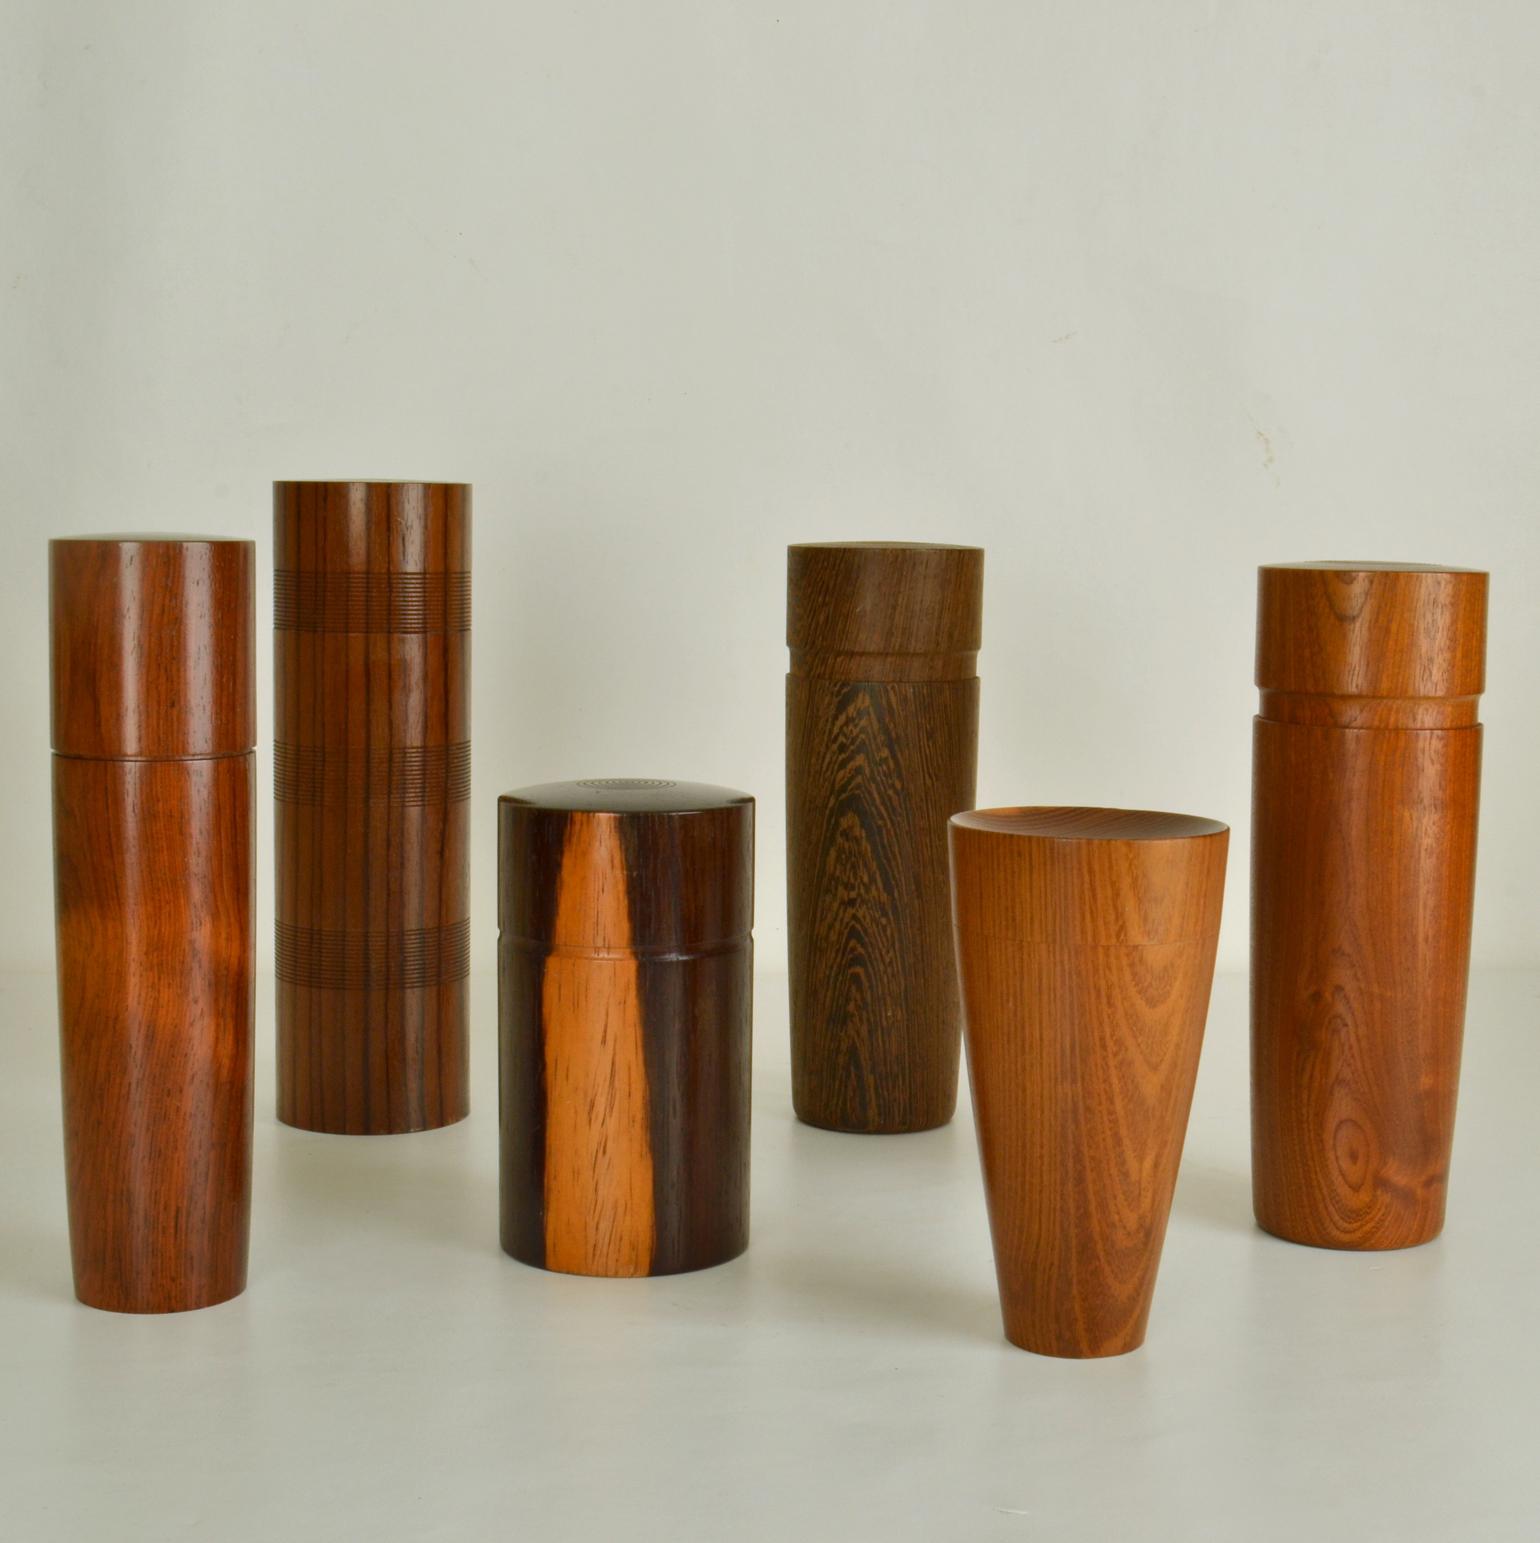 Set of six refined hand turned wooden boxes each in a different specimen in straight and tapered cylinder shape in various heights showing excellent craftsmanship. The grain and patterns of the wood match up perfectly between the thin walled box and